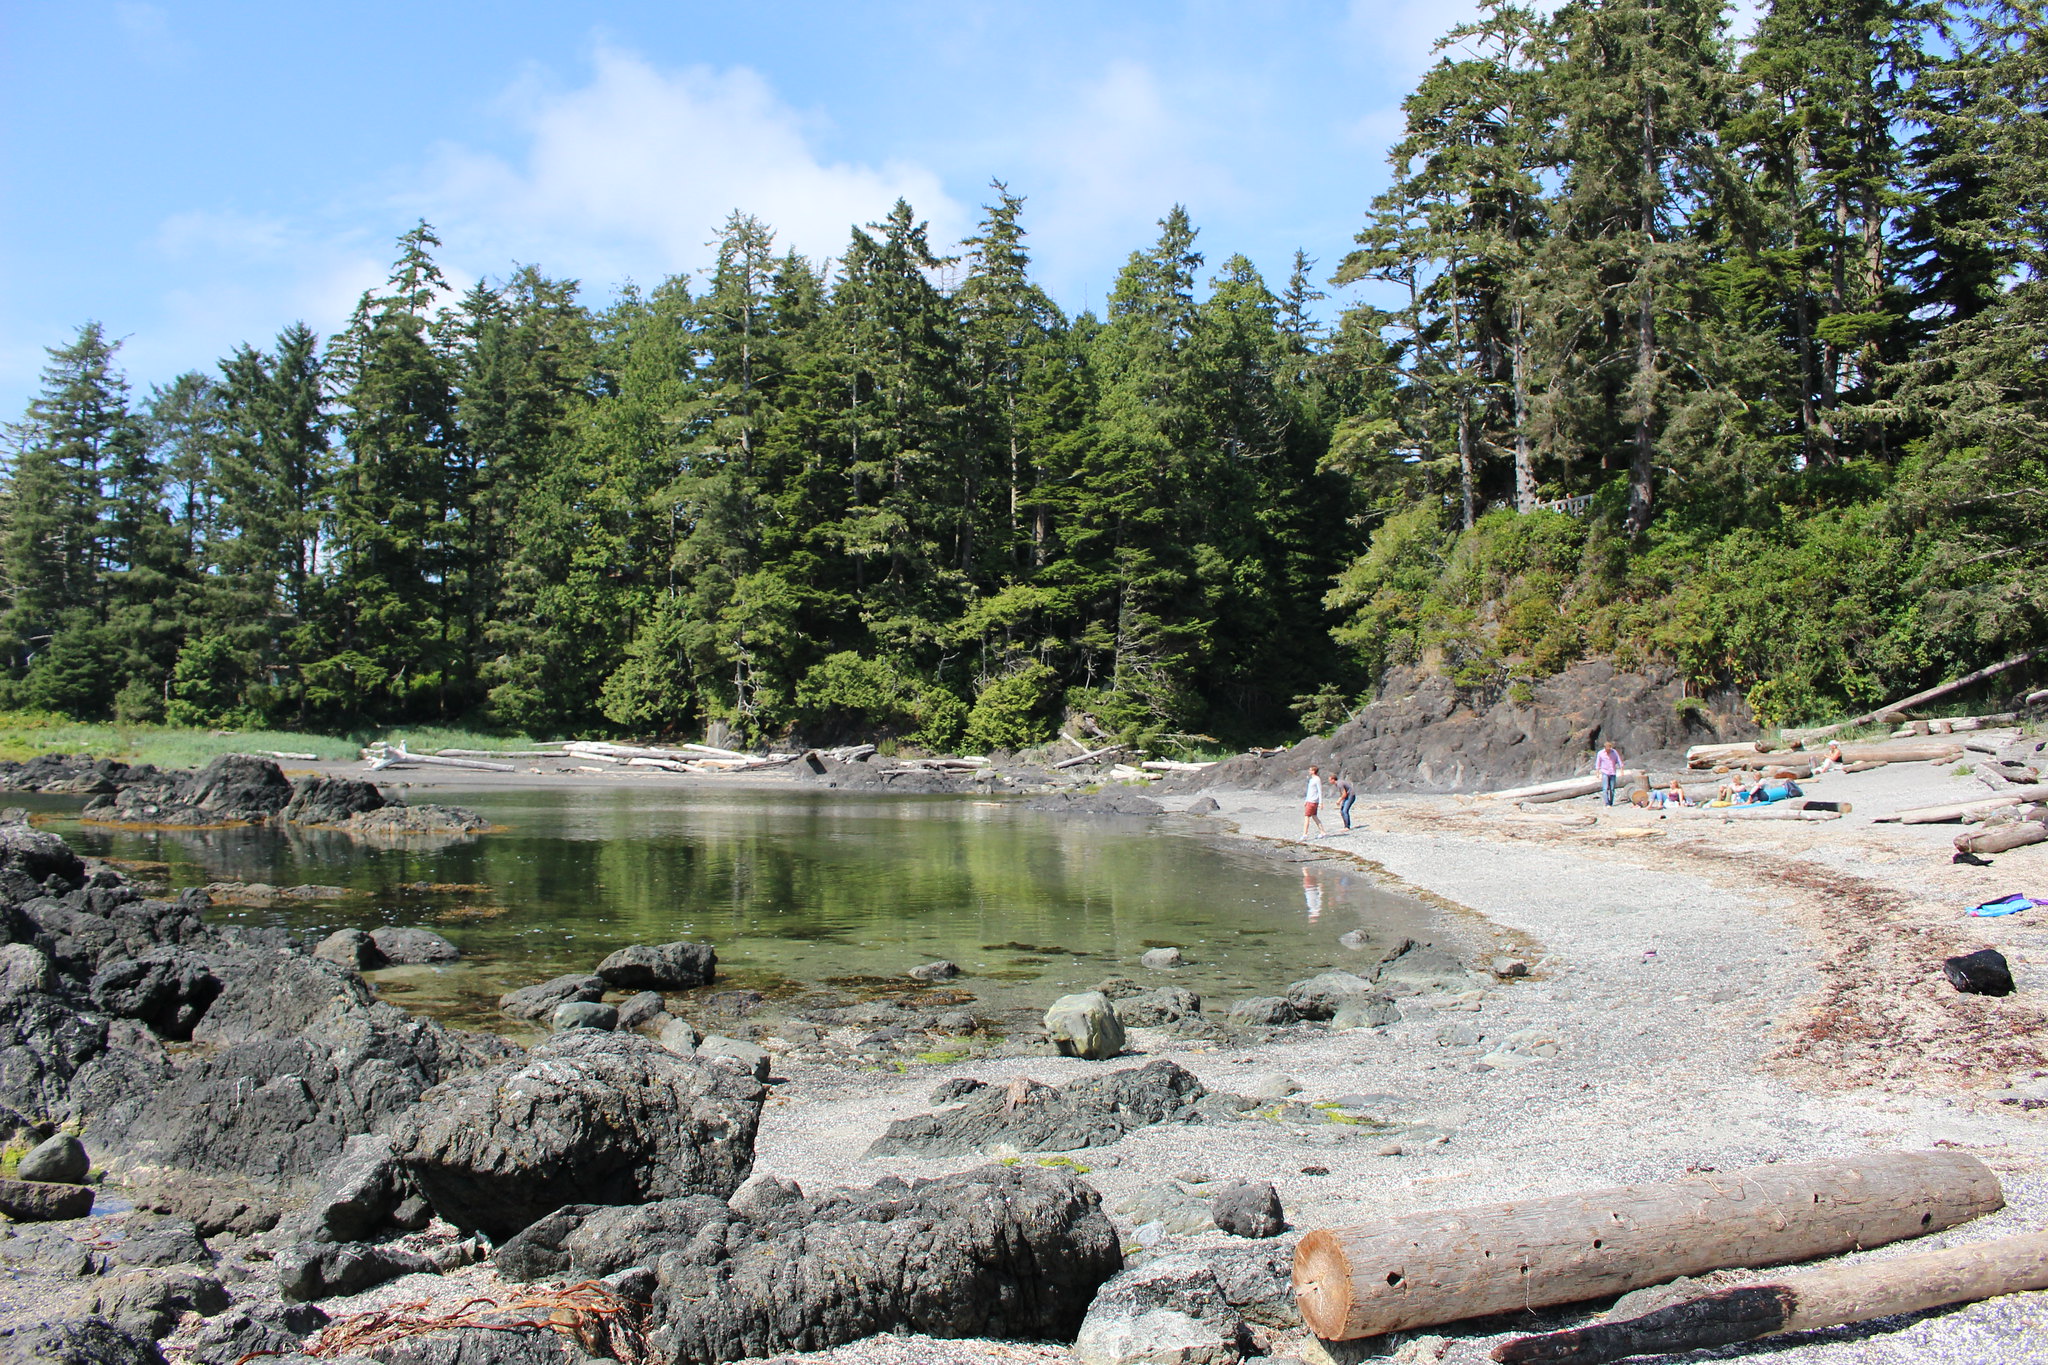 Ucluelet - August 2015